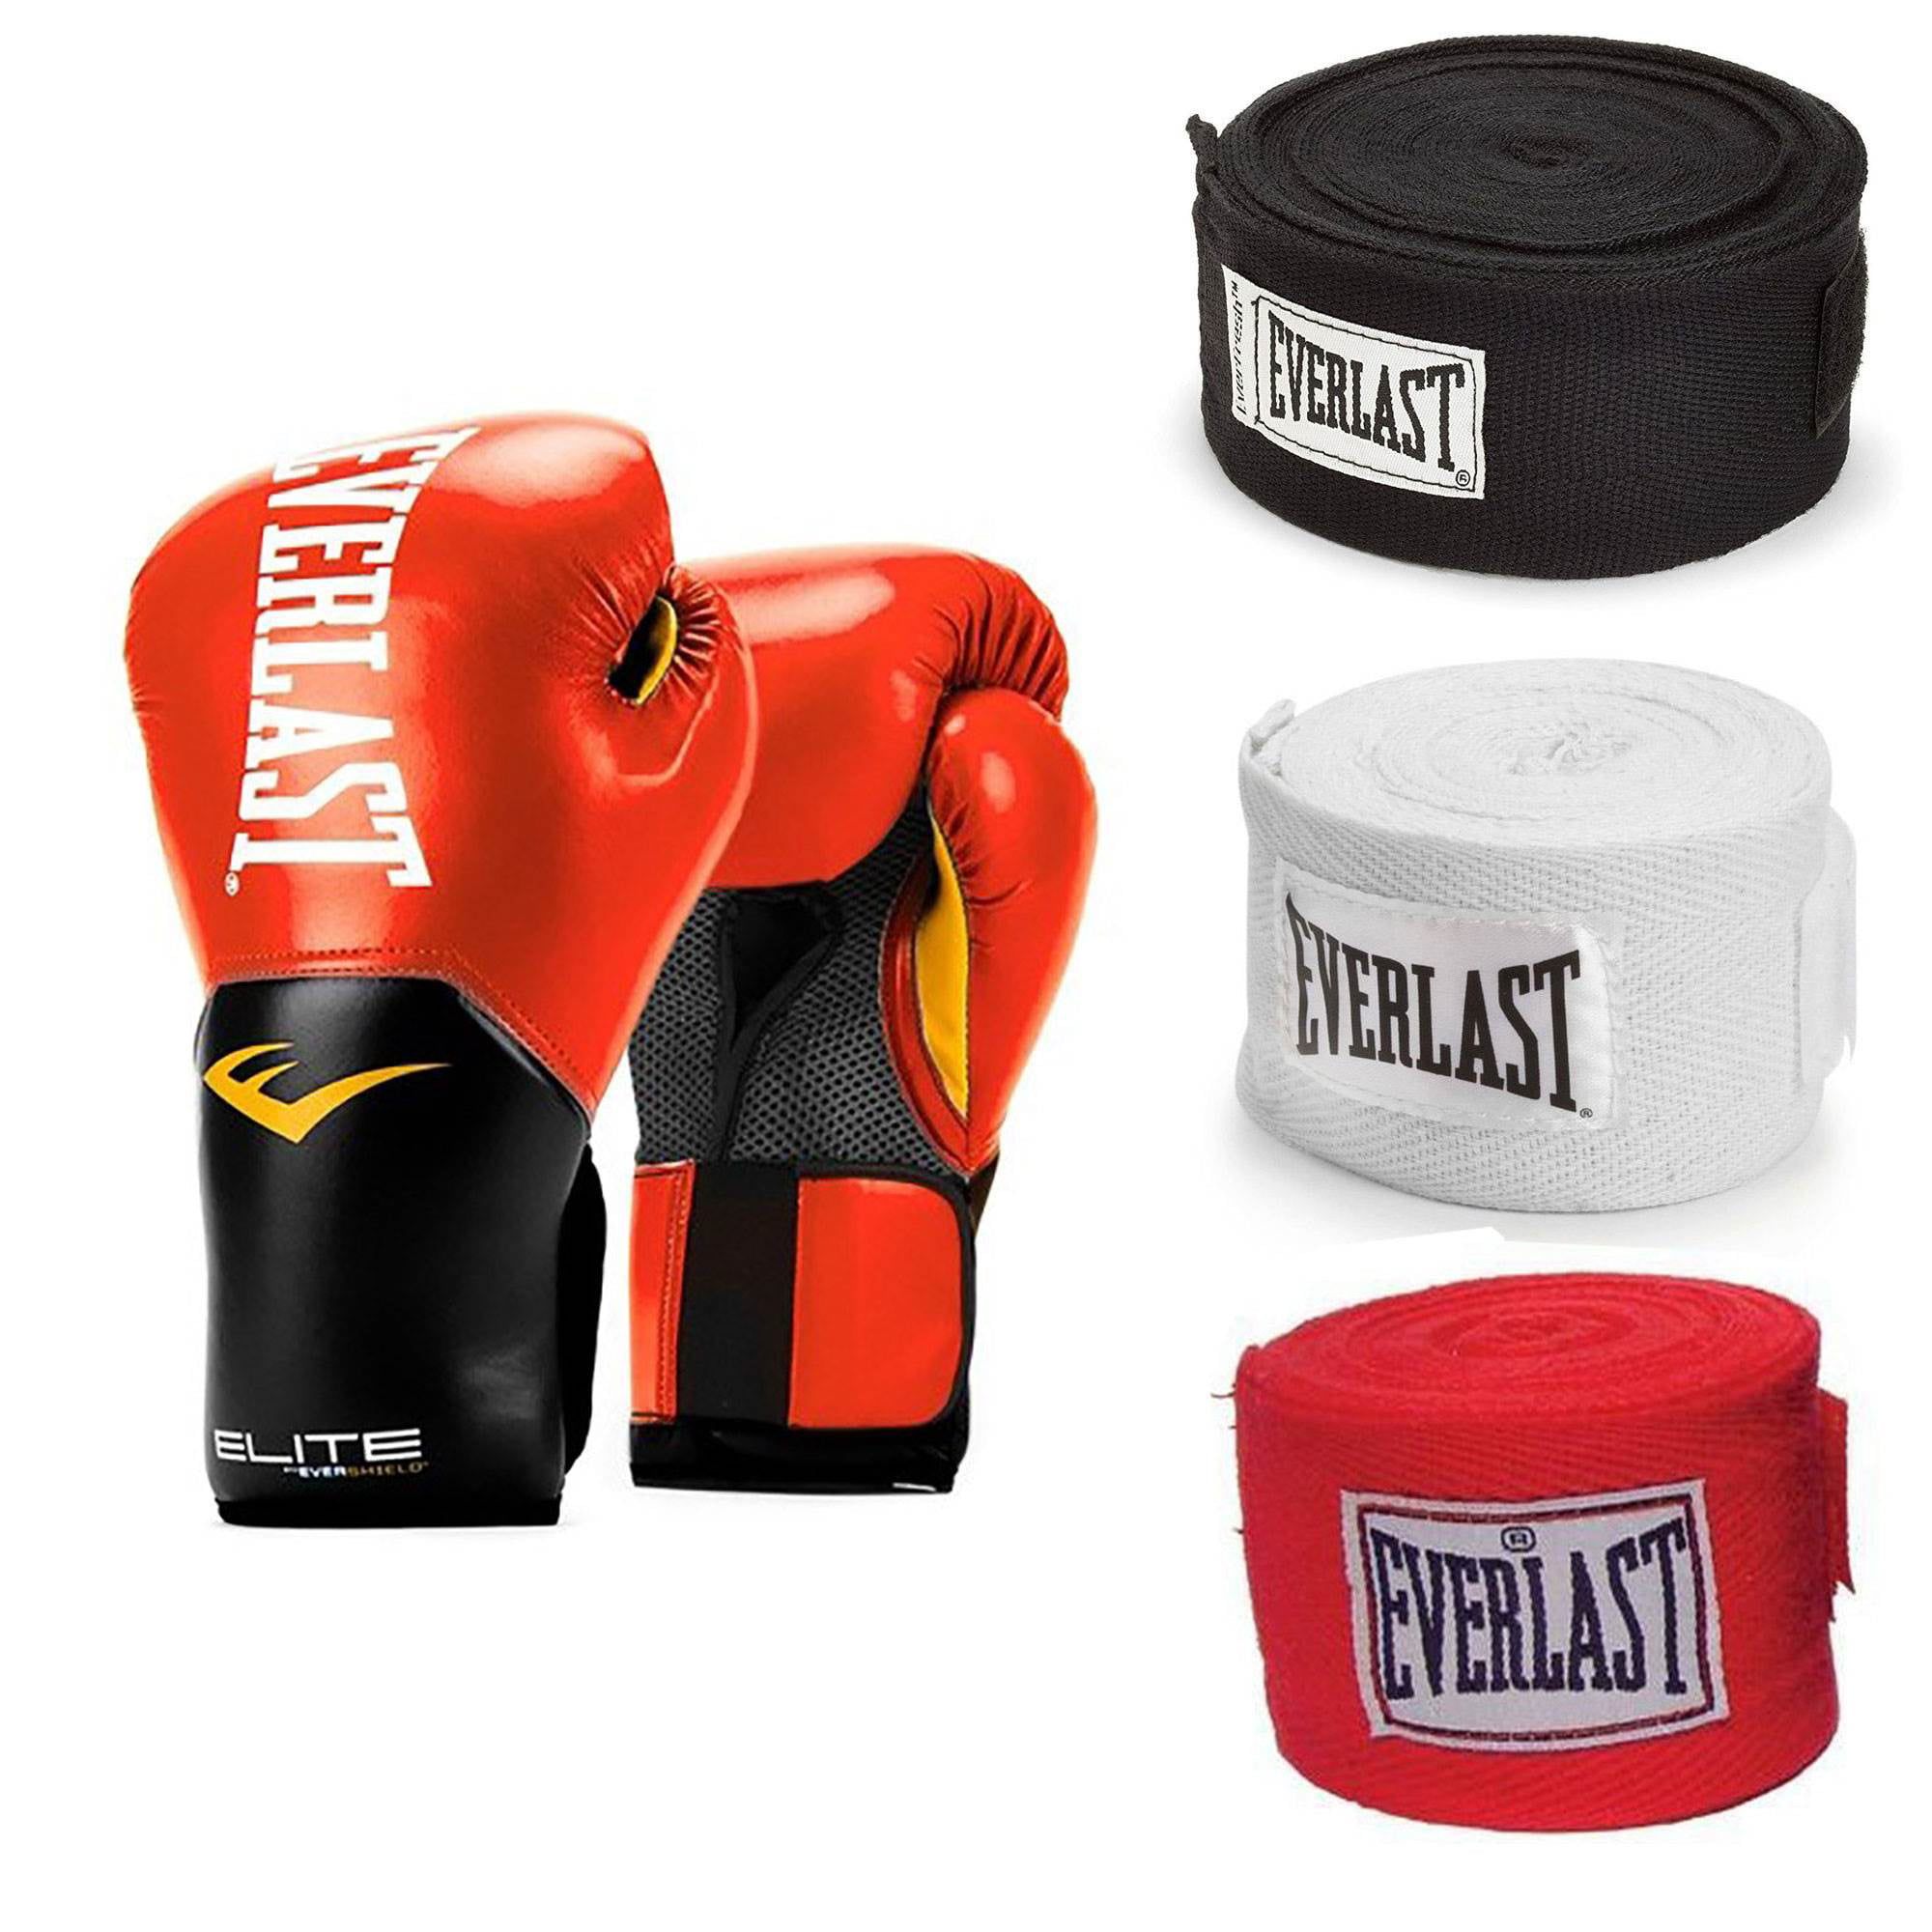 Everlast Pro Style MMA Grappling Gloves for sale online 